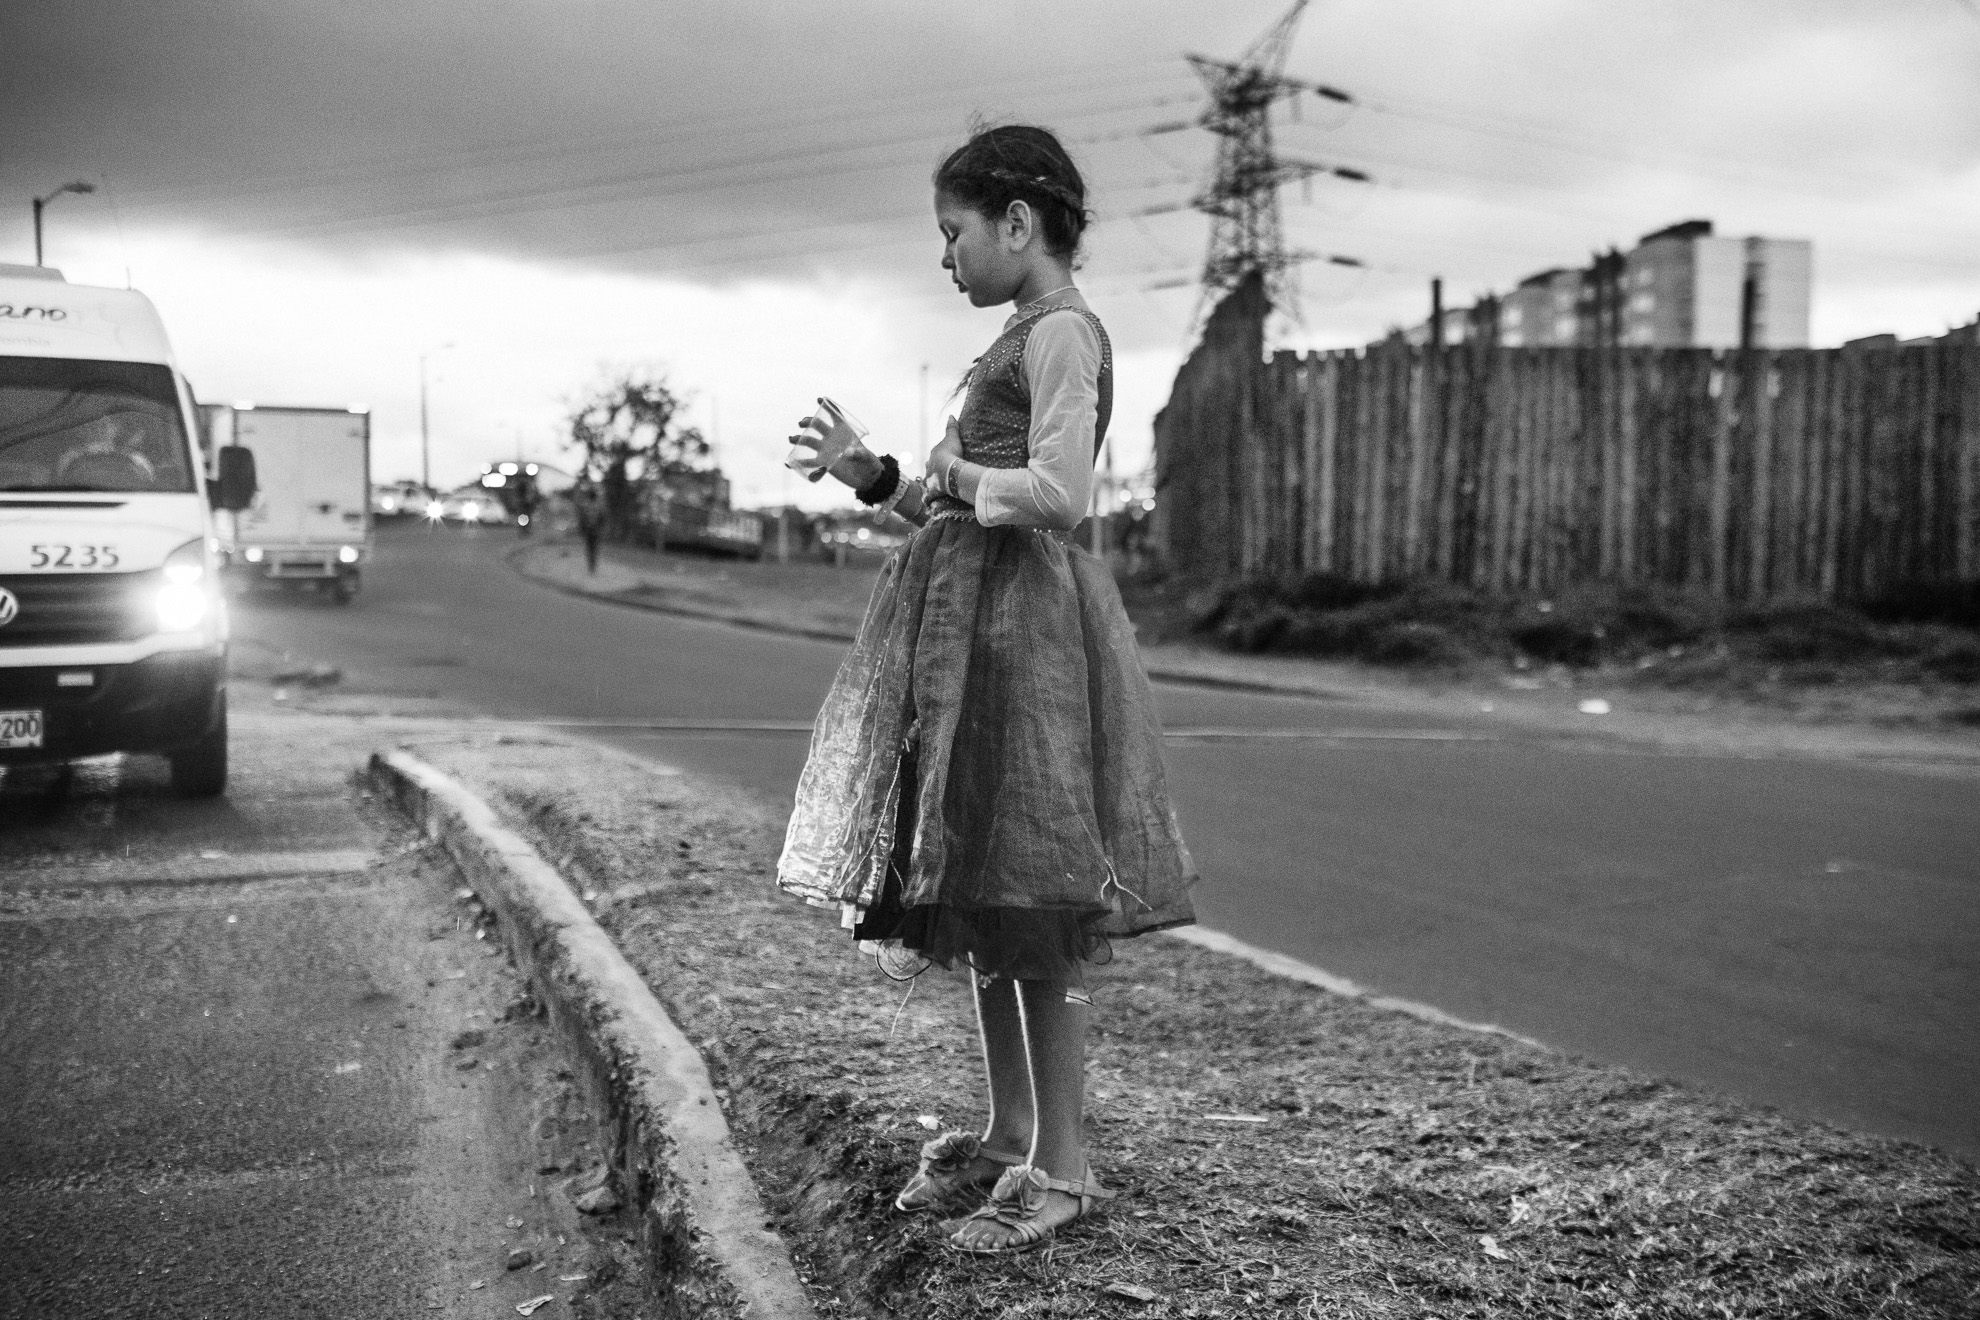 A young girl asks for money on a street in the Colombian capital, Bogotá. By June 2019, the Colombian Institute of Family Welfare (ICBF) had provided attention to nearly 80,000 Venezuelan children, adolescents and families countrywide.